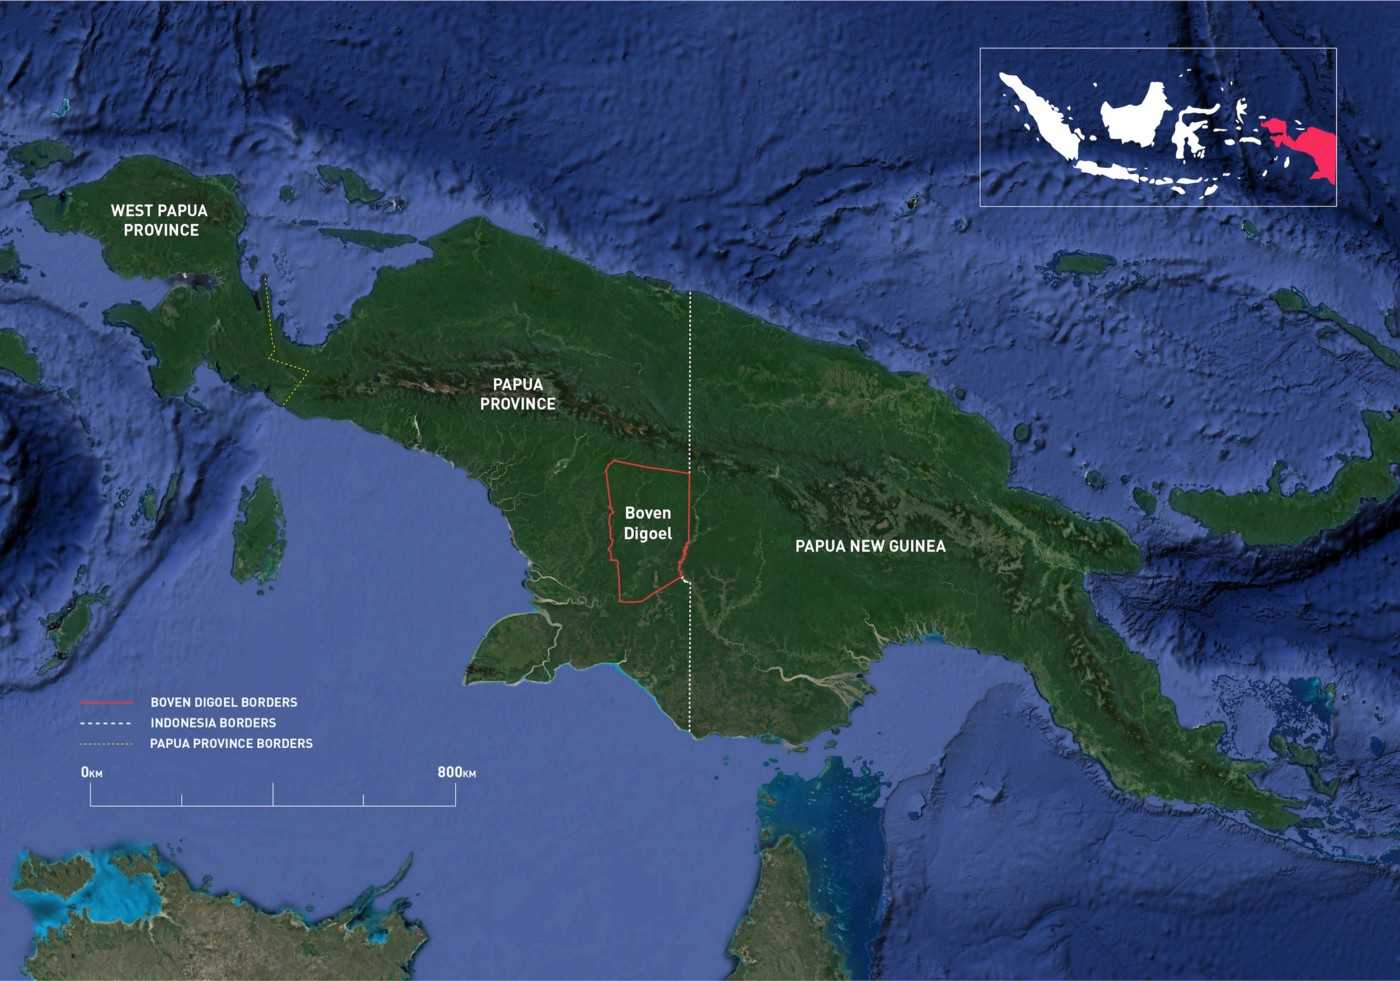 The island of New Guinea is divided between Indonesia and Papua New Guinea.